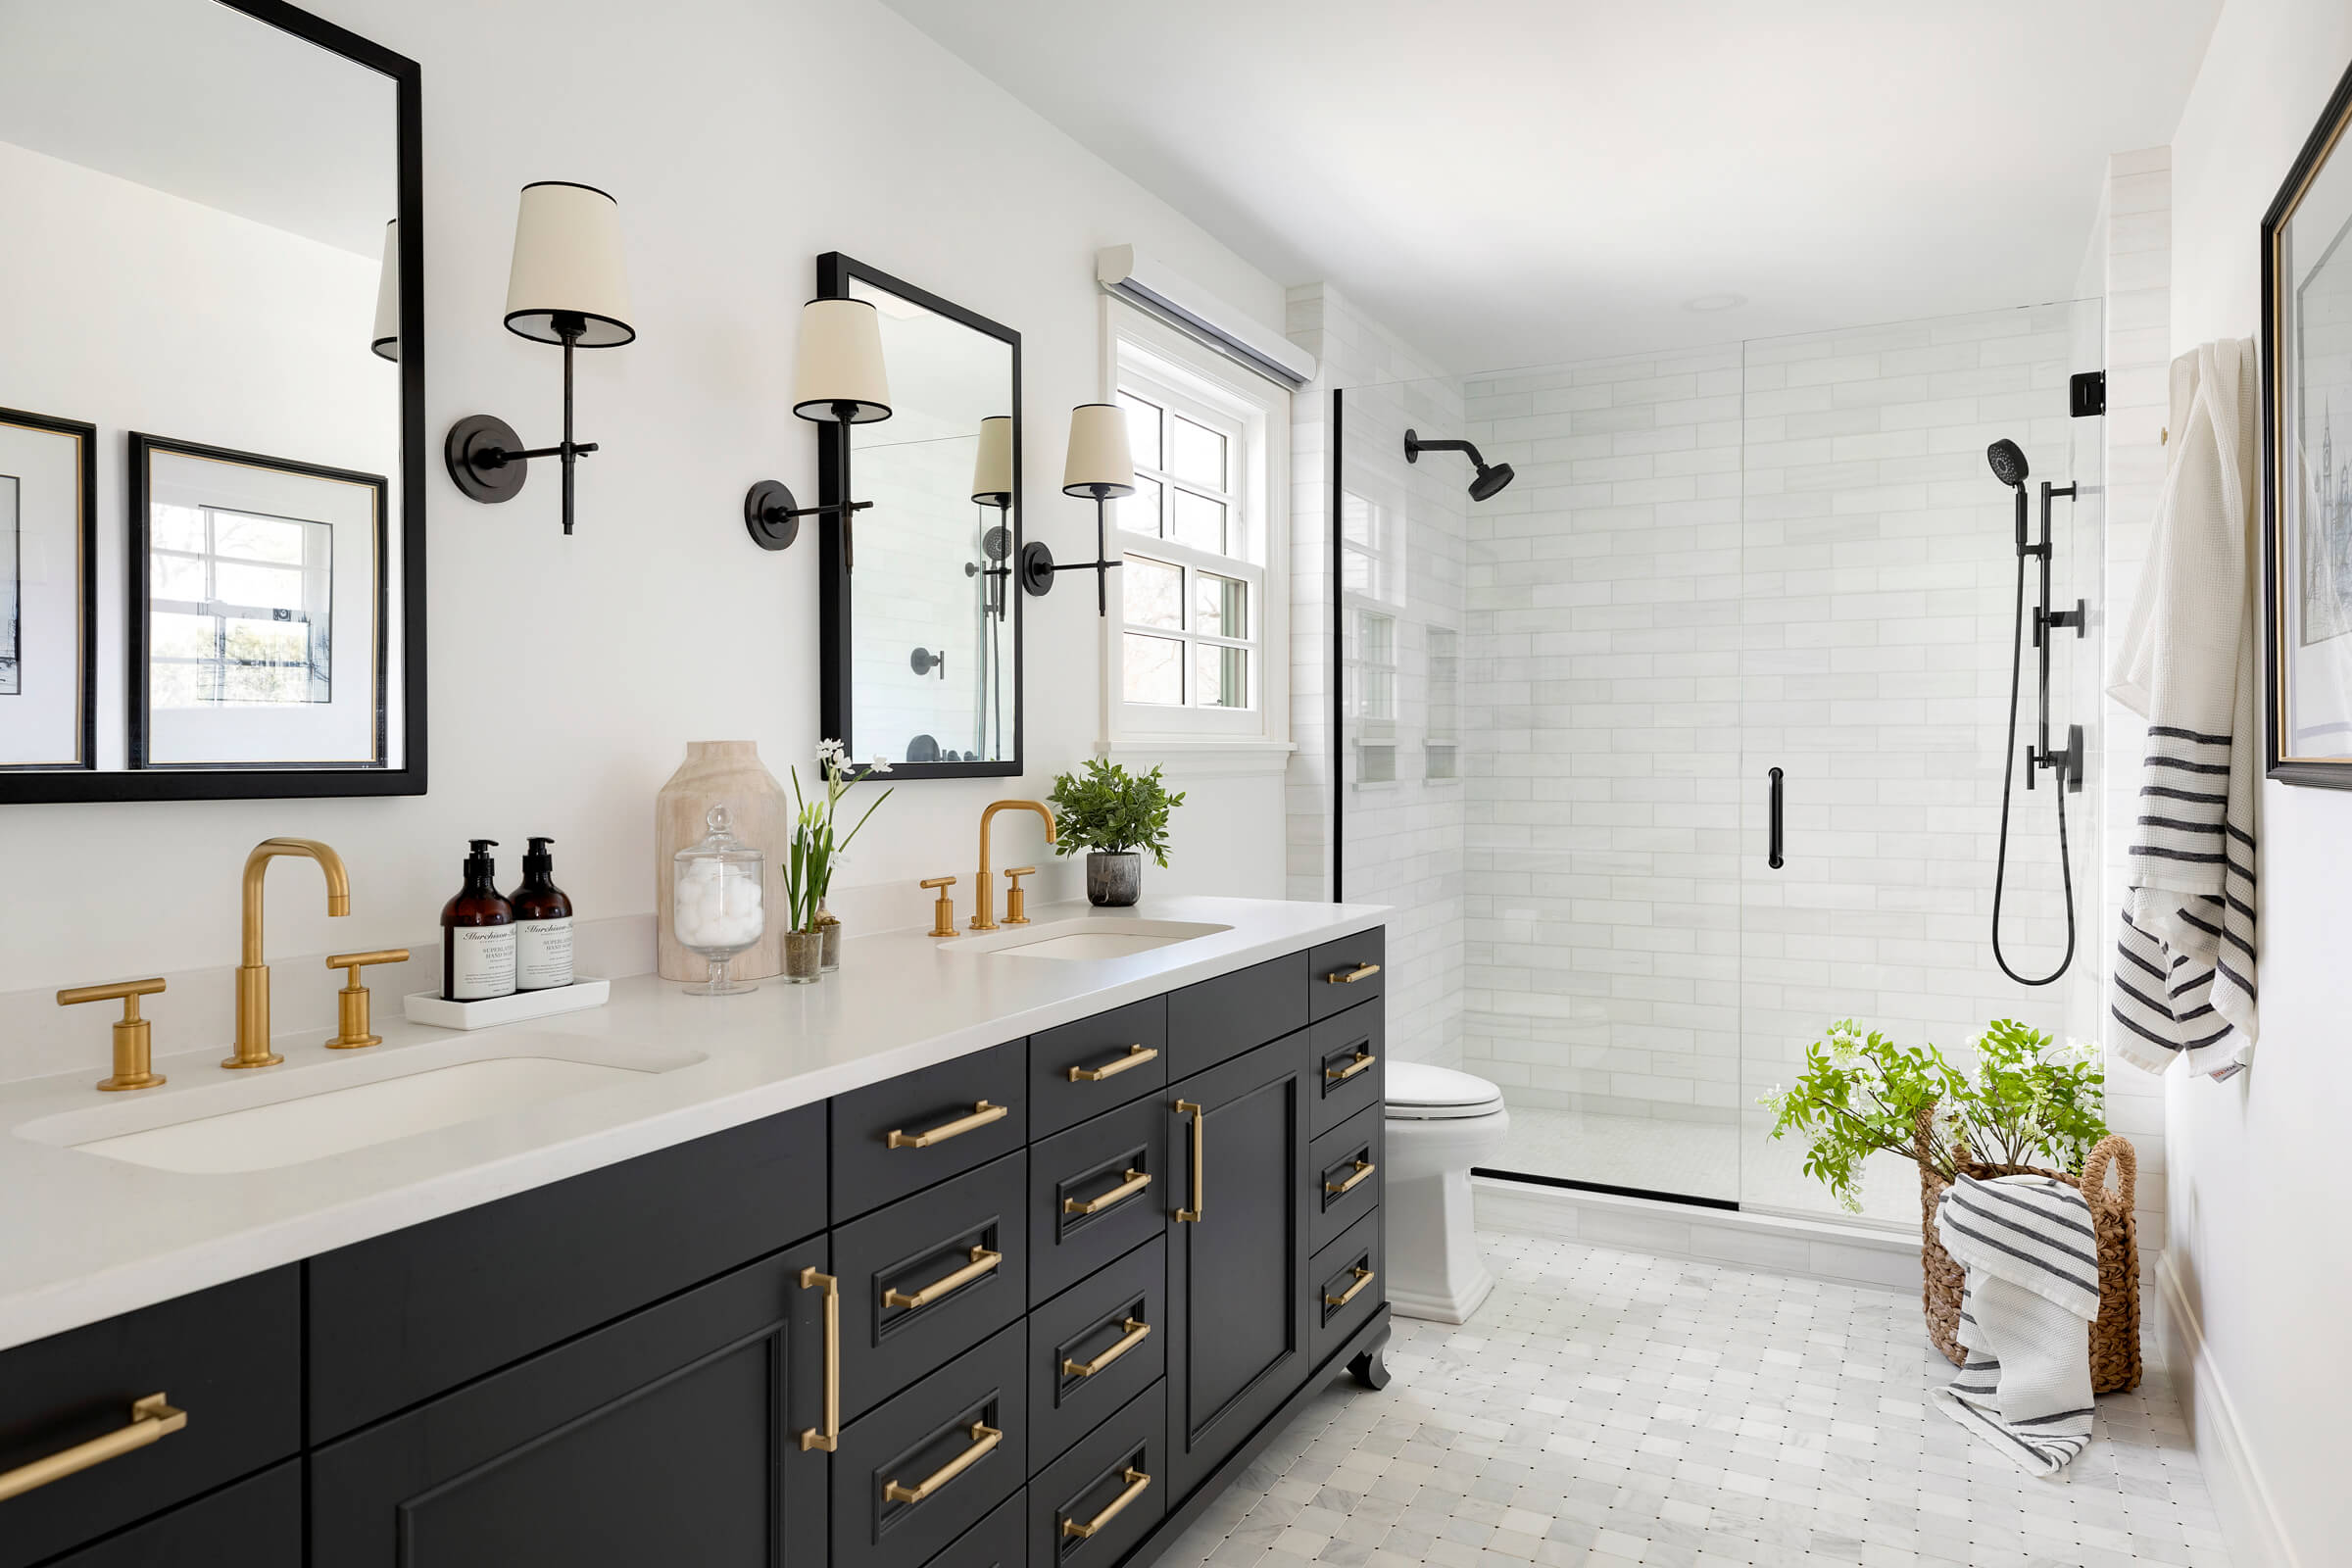 Bathroom remodels are a big investment in your home and a commitment to design. Most of the selections are "hard" finishes, permanently installed, and not as easily changed out. Choosing plumbing fixtures, tile, lighting, and accessories are big considerations for the overall design of a bathroom.